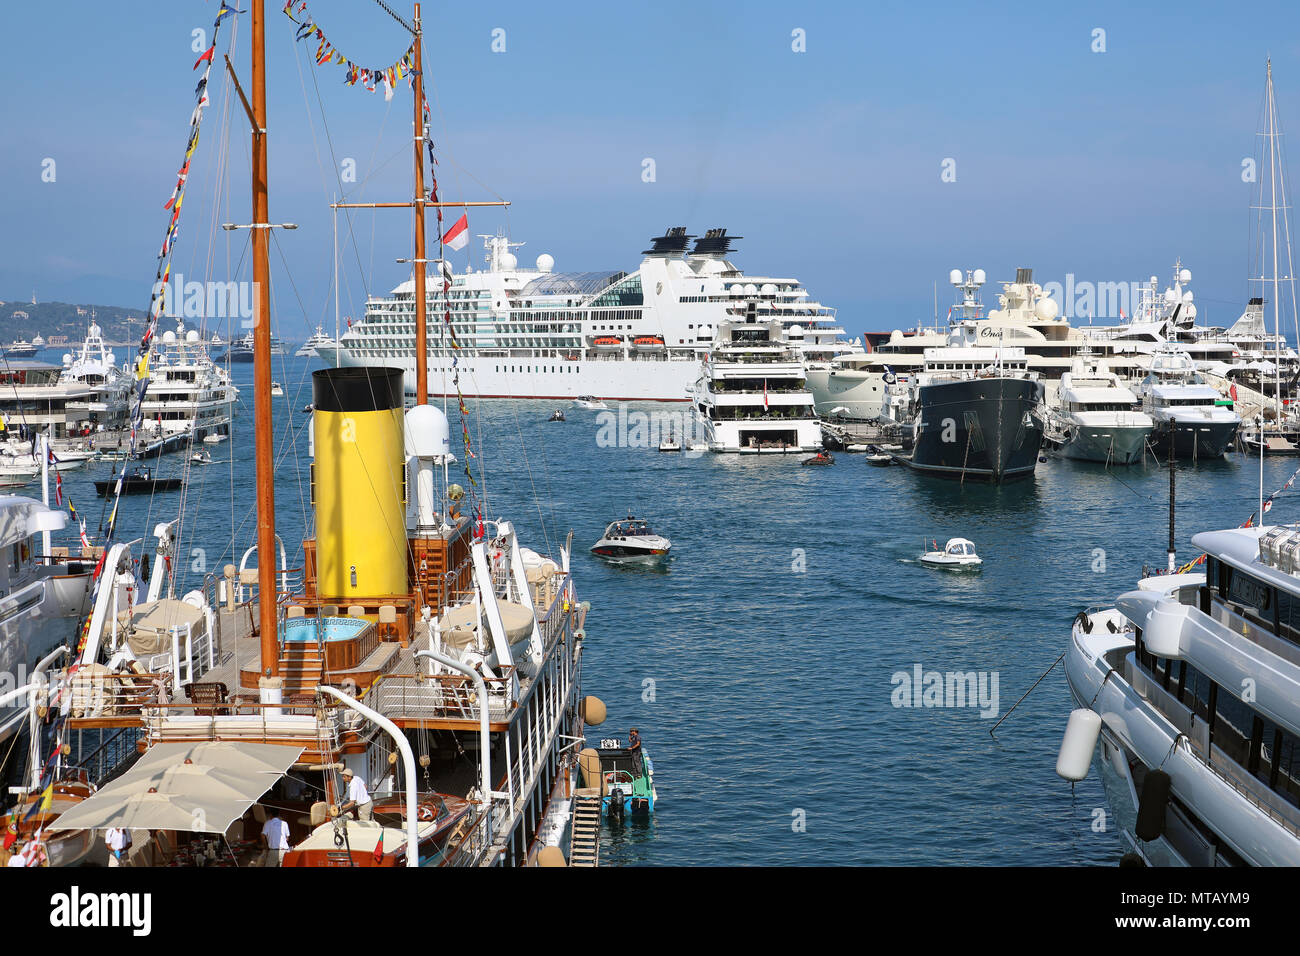 Monte-Carlo; Monaco - May 24; 2018: Rear View of a Vintage Luxury Sailboat In The Monte-Carlo Harbour (Port Hercule), Cruise Liner in The Background.  Stock Photo